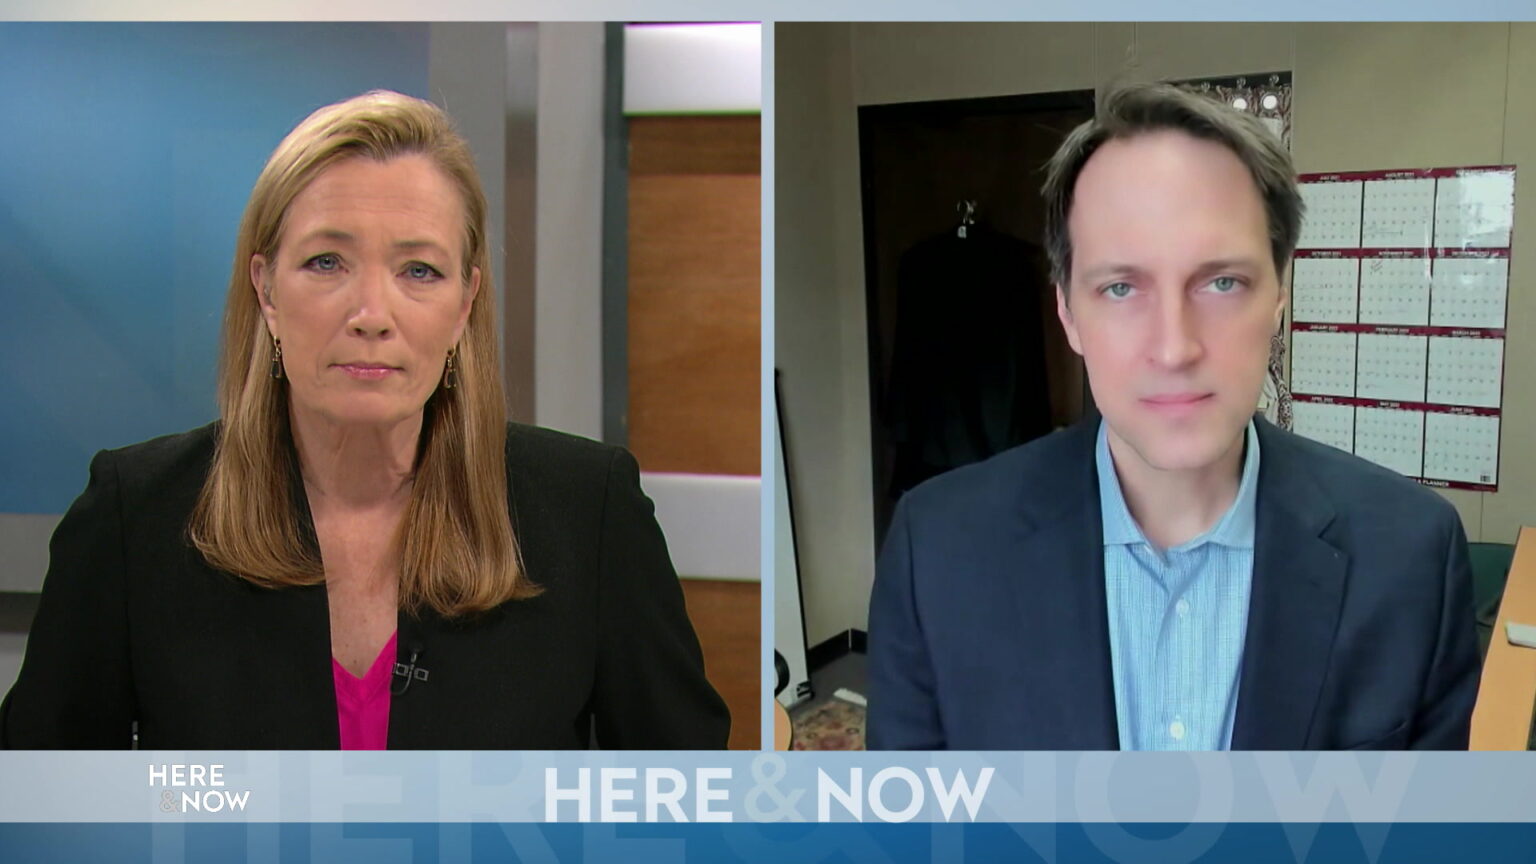 From left to right, a split screen with Frederica Freyberg and Dr. Ryan Westergaard seated in different locations